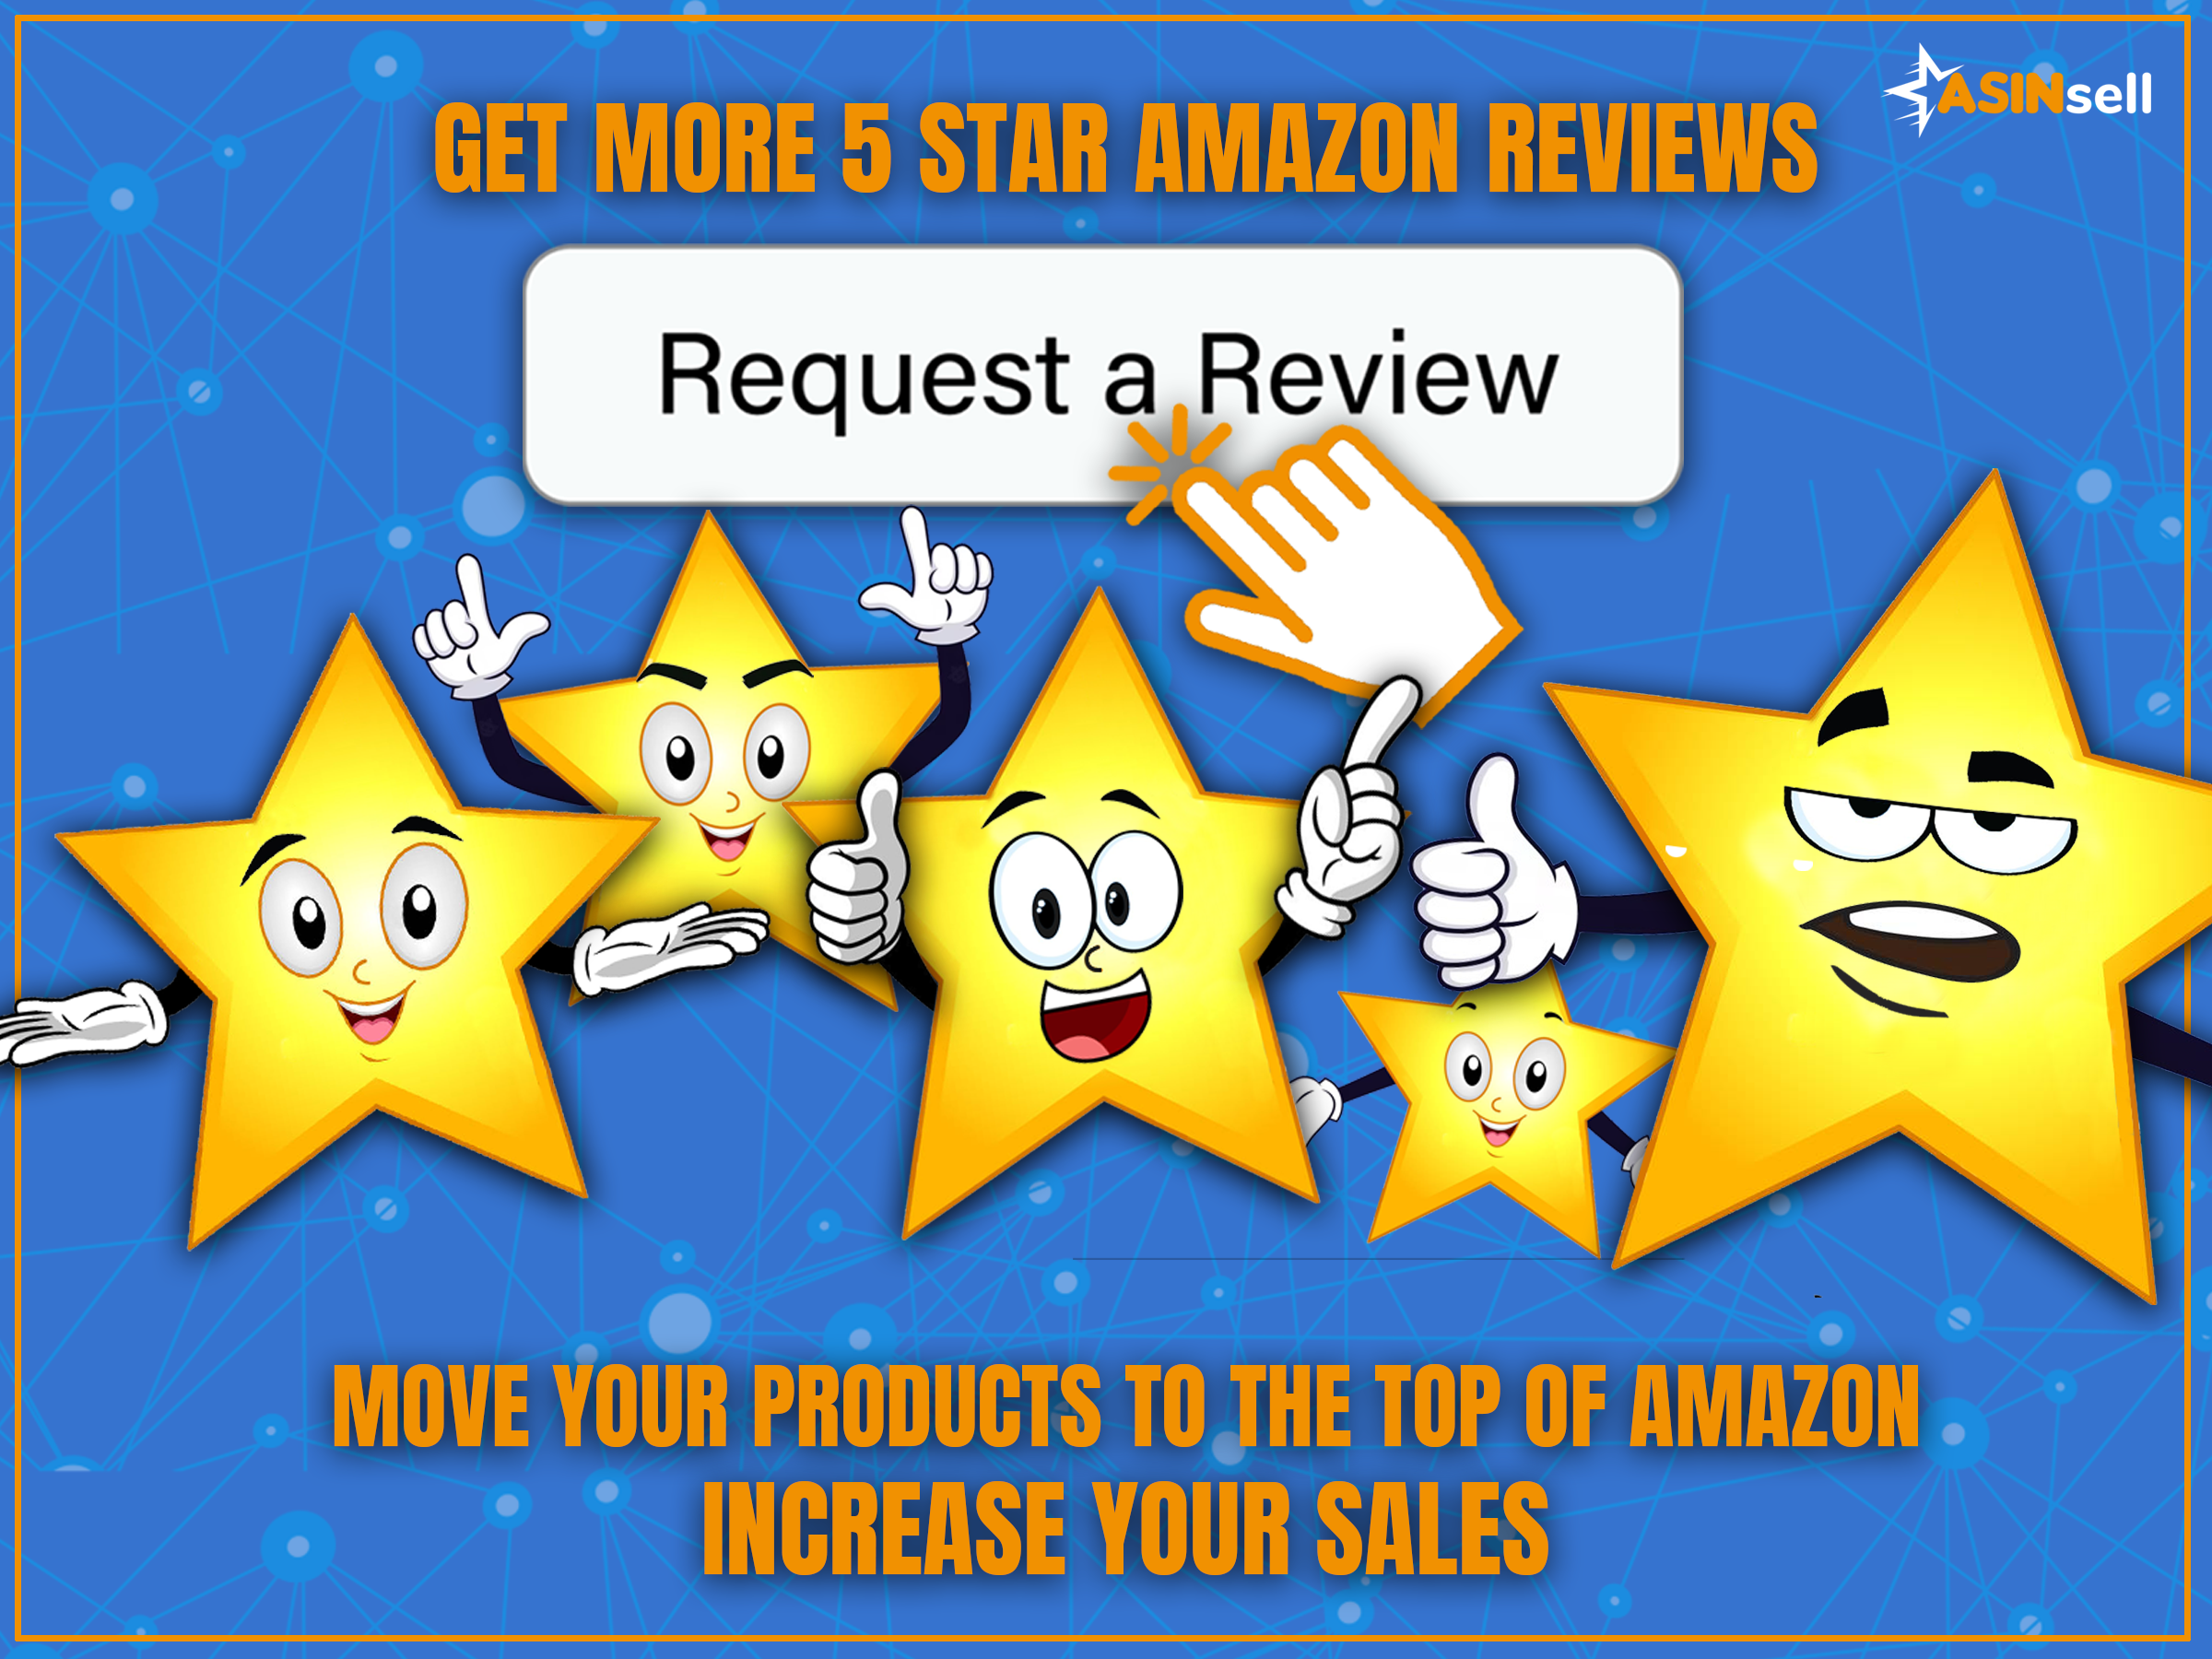 ASINsell Amazon Product Review Request Tool